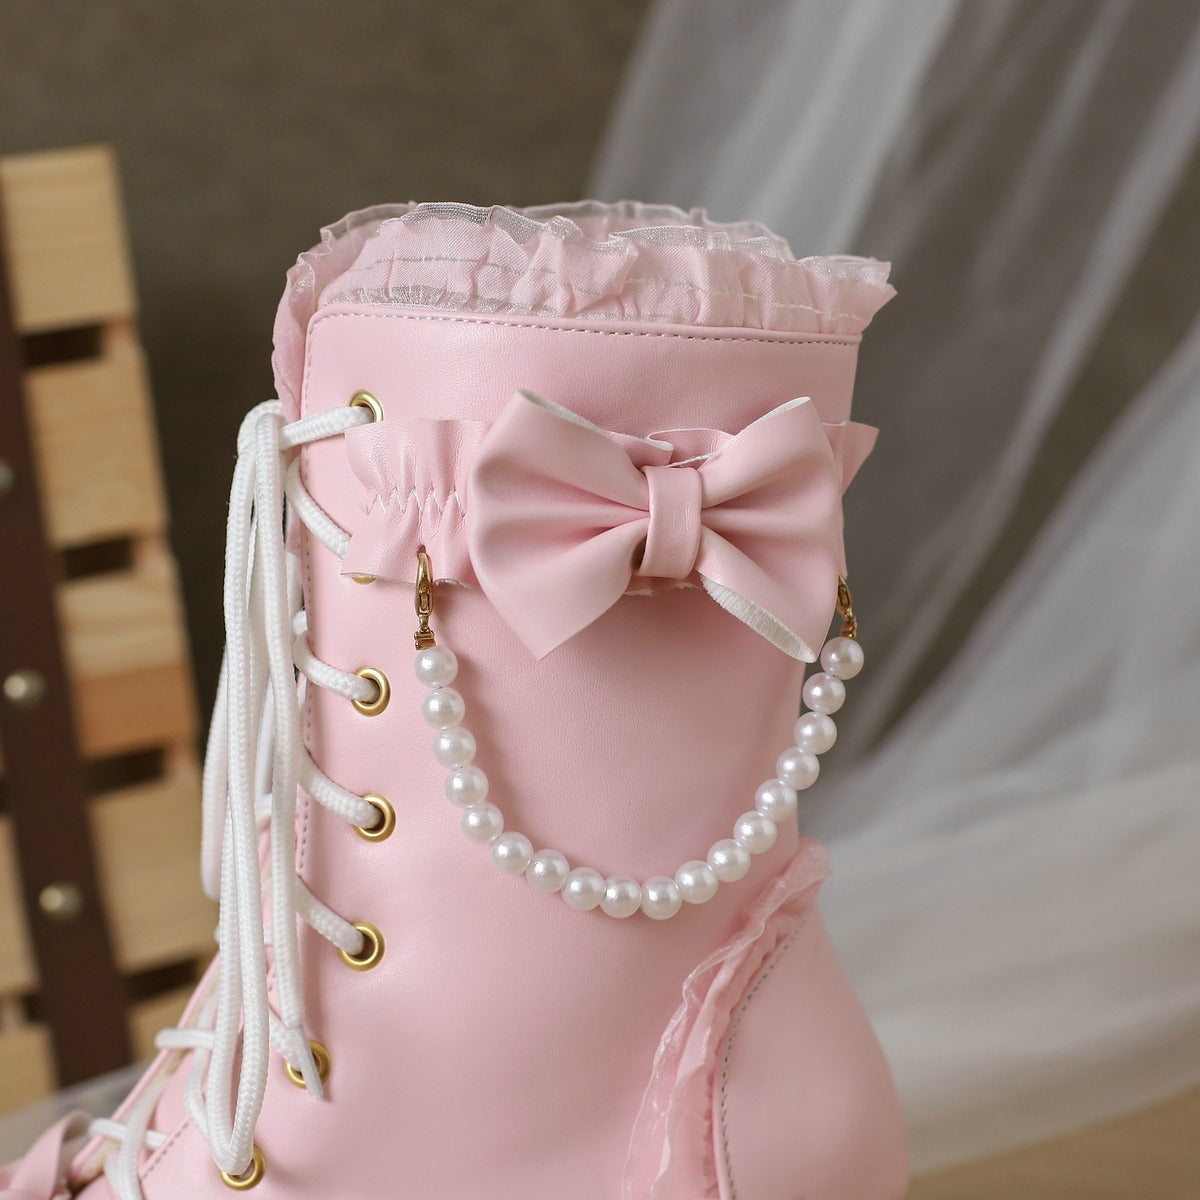 Lolita Sweet Bow Beads Platform Lace Up Boots